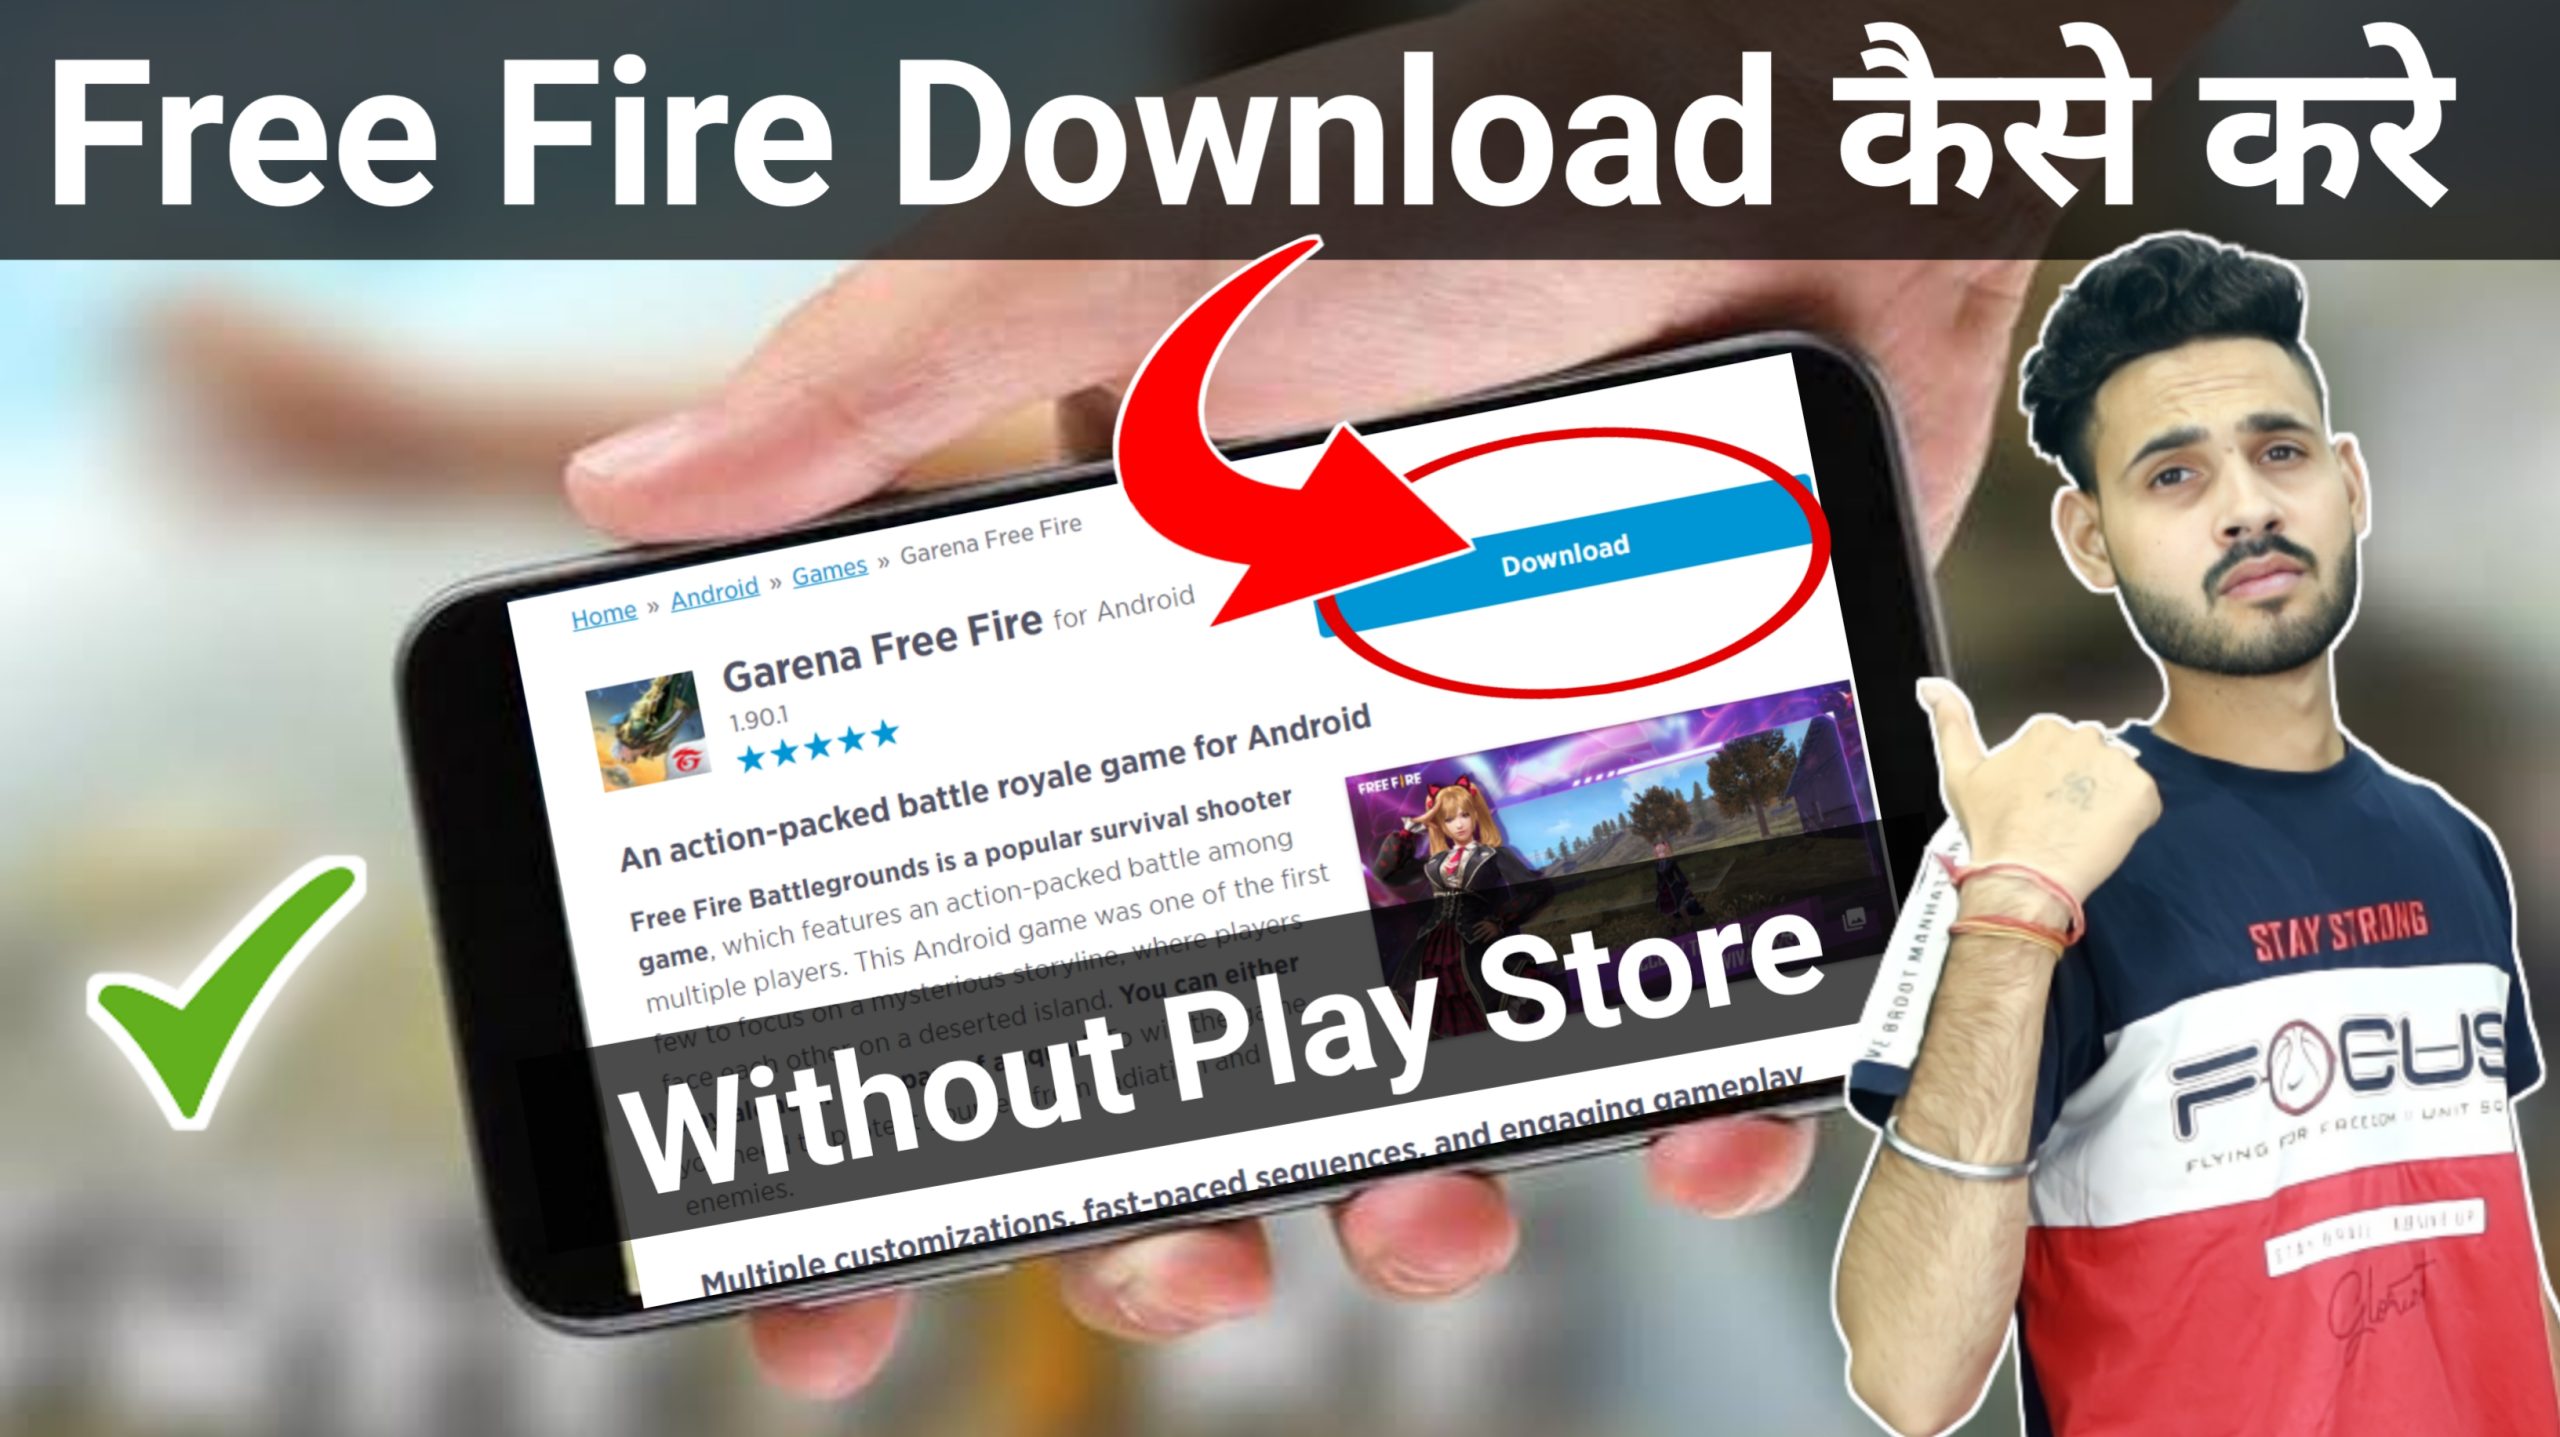 Free Fire Download Kaise kare | How to Download Free Fire Game 